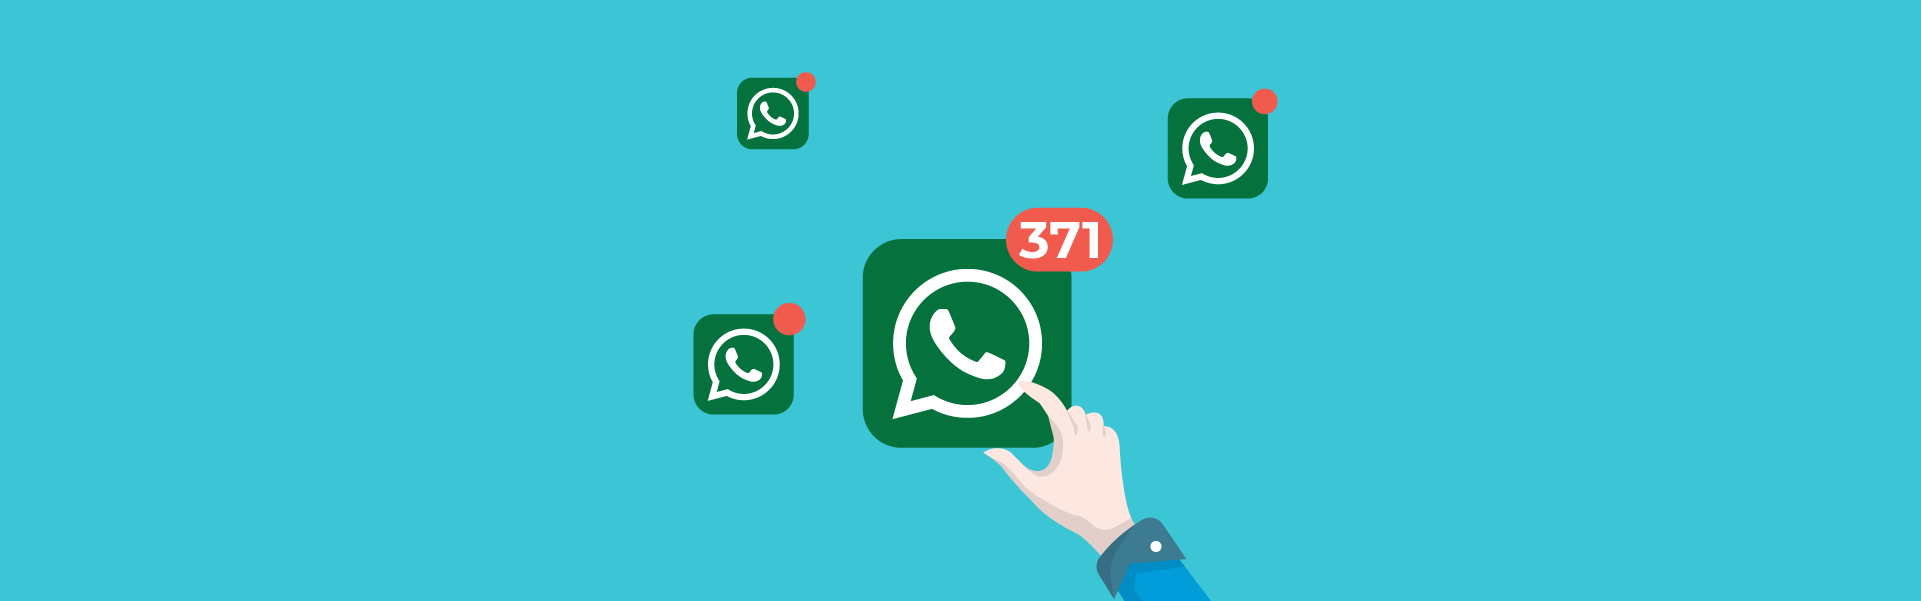 Go Where Your Customers Are: Use WhatsApp for Marketing